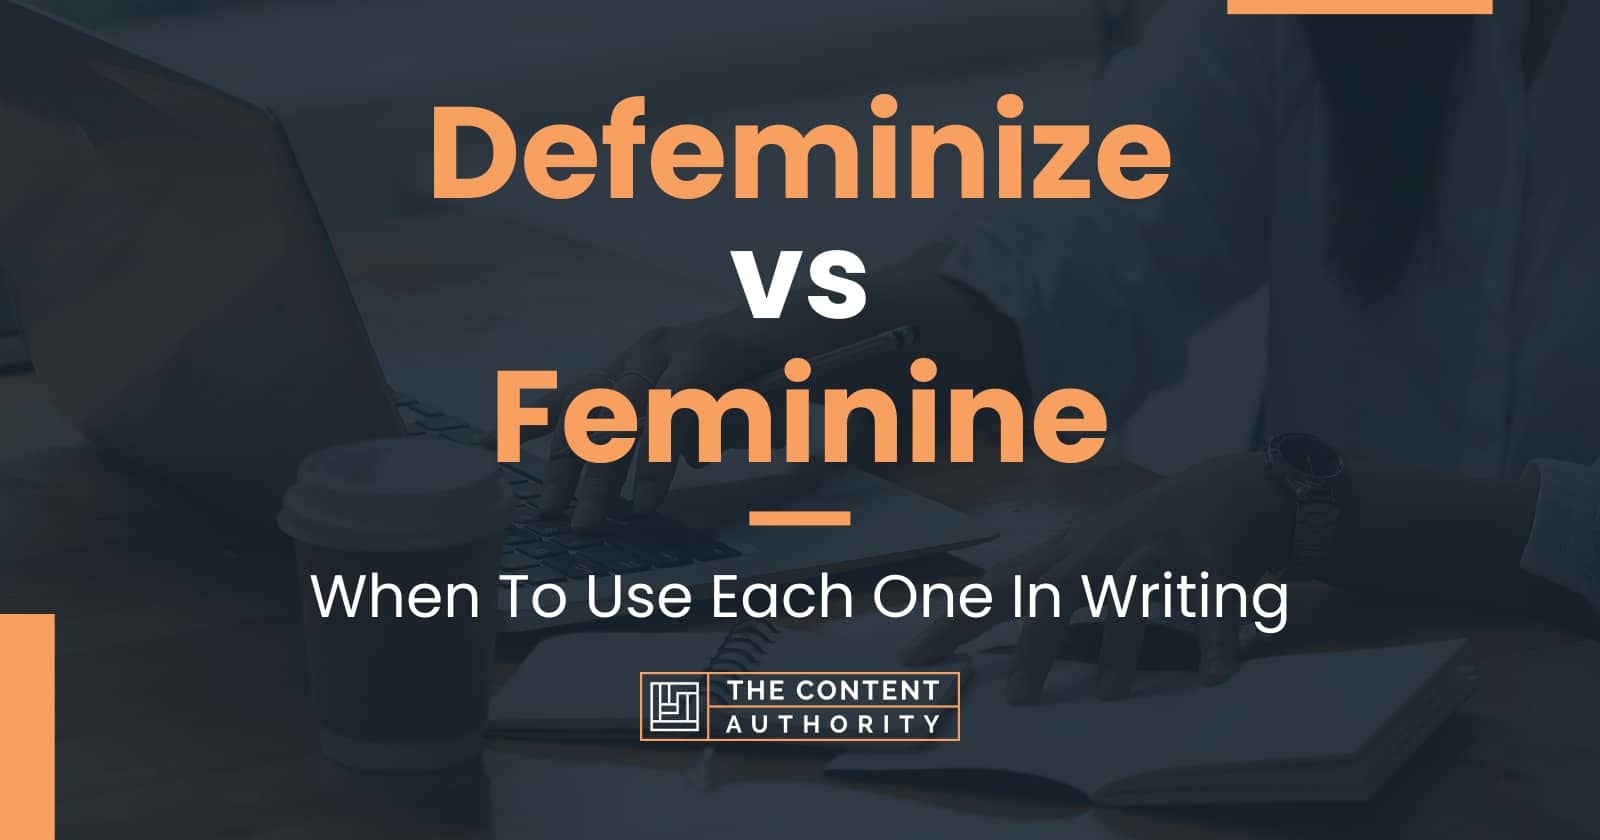 Defeminize vs Feminine: When To Use Each One In Writing